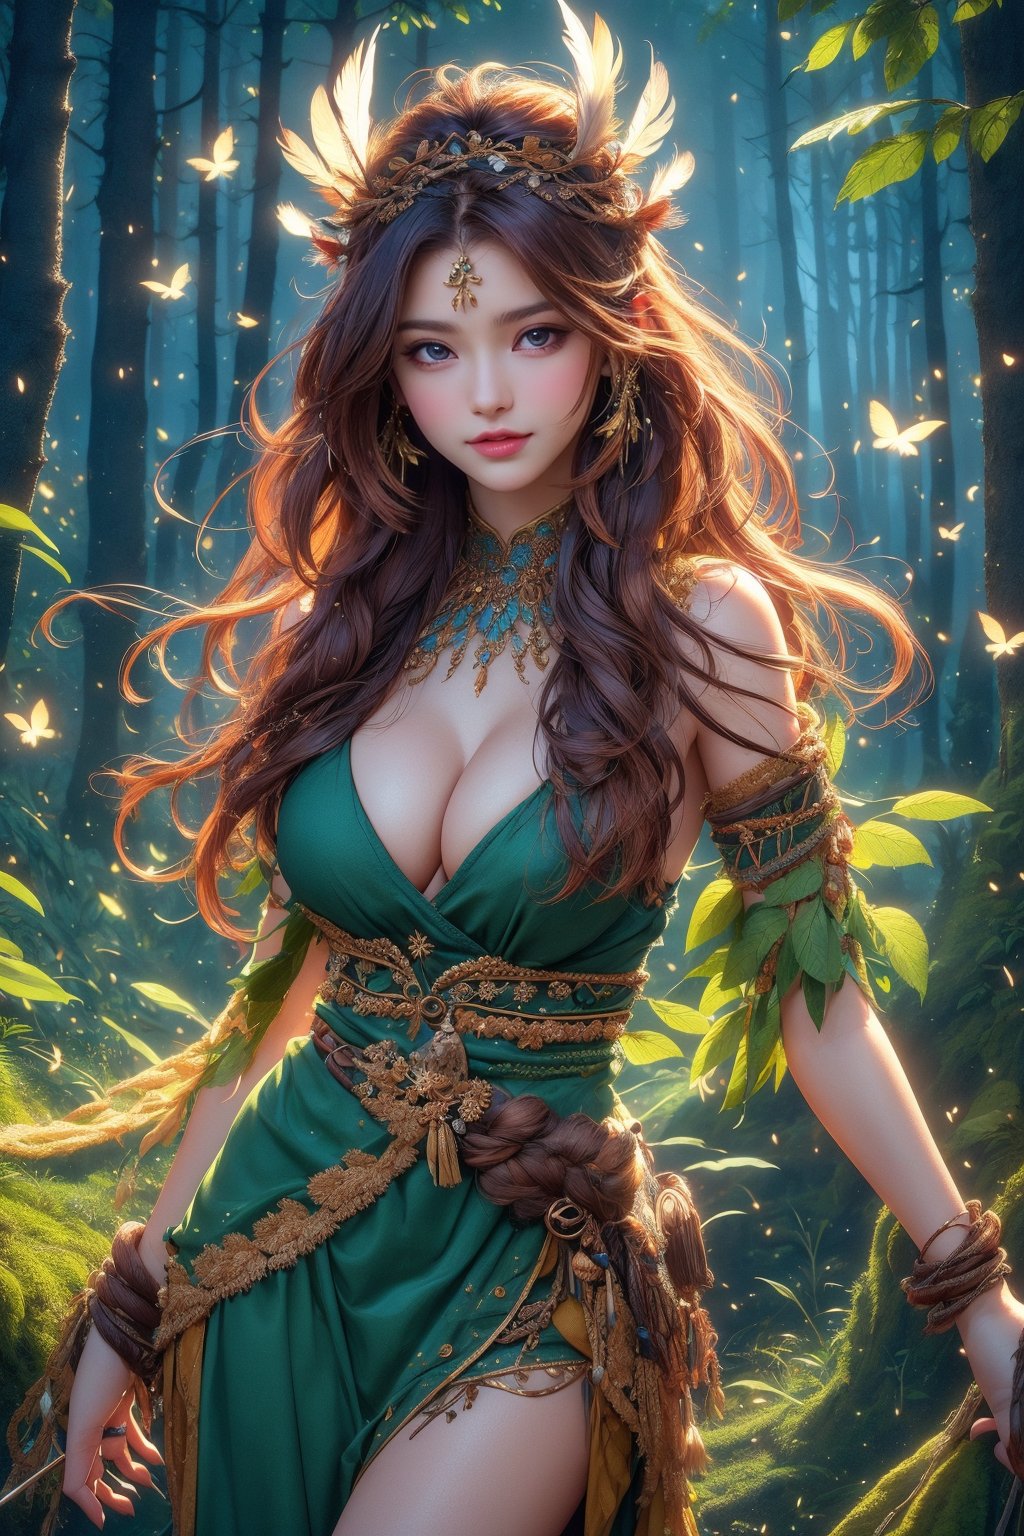 busty and sexy girl, Tribal girl, feather headdress 8k, masterpiece, ultra-realistic, best quality, high resolution, high definition,  the character should be a mischievous forest spirit, LOW-CUT SEXY DRESS, leaves woven into their hair. The background should be a moonlit forest clearing, with fireflies dancing in the air. The overall mood should be mysterious and enchanting, inviting viewers to explore the hidden magic of the woods